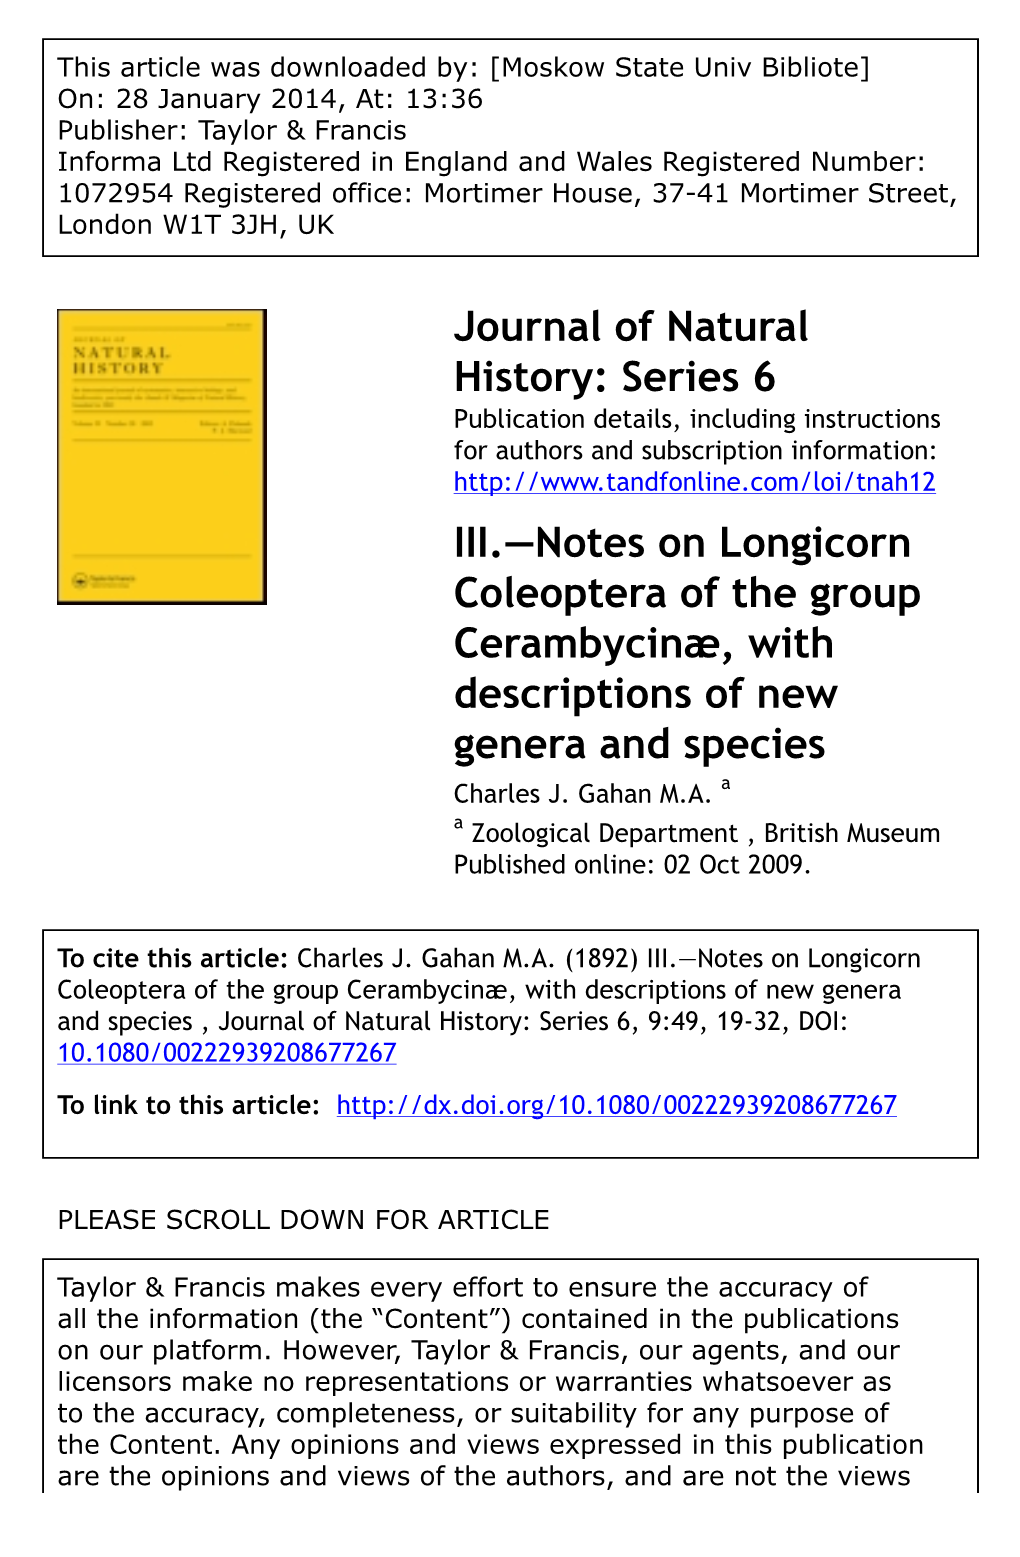 Journal of Natural History: Series 6 III.—Notes on Longicorn Coleoptera